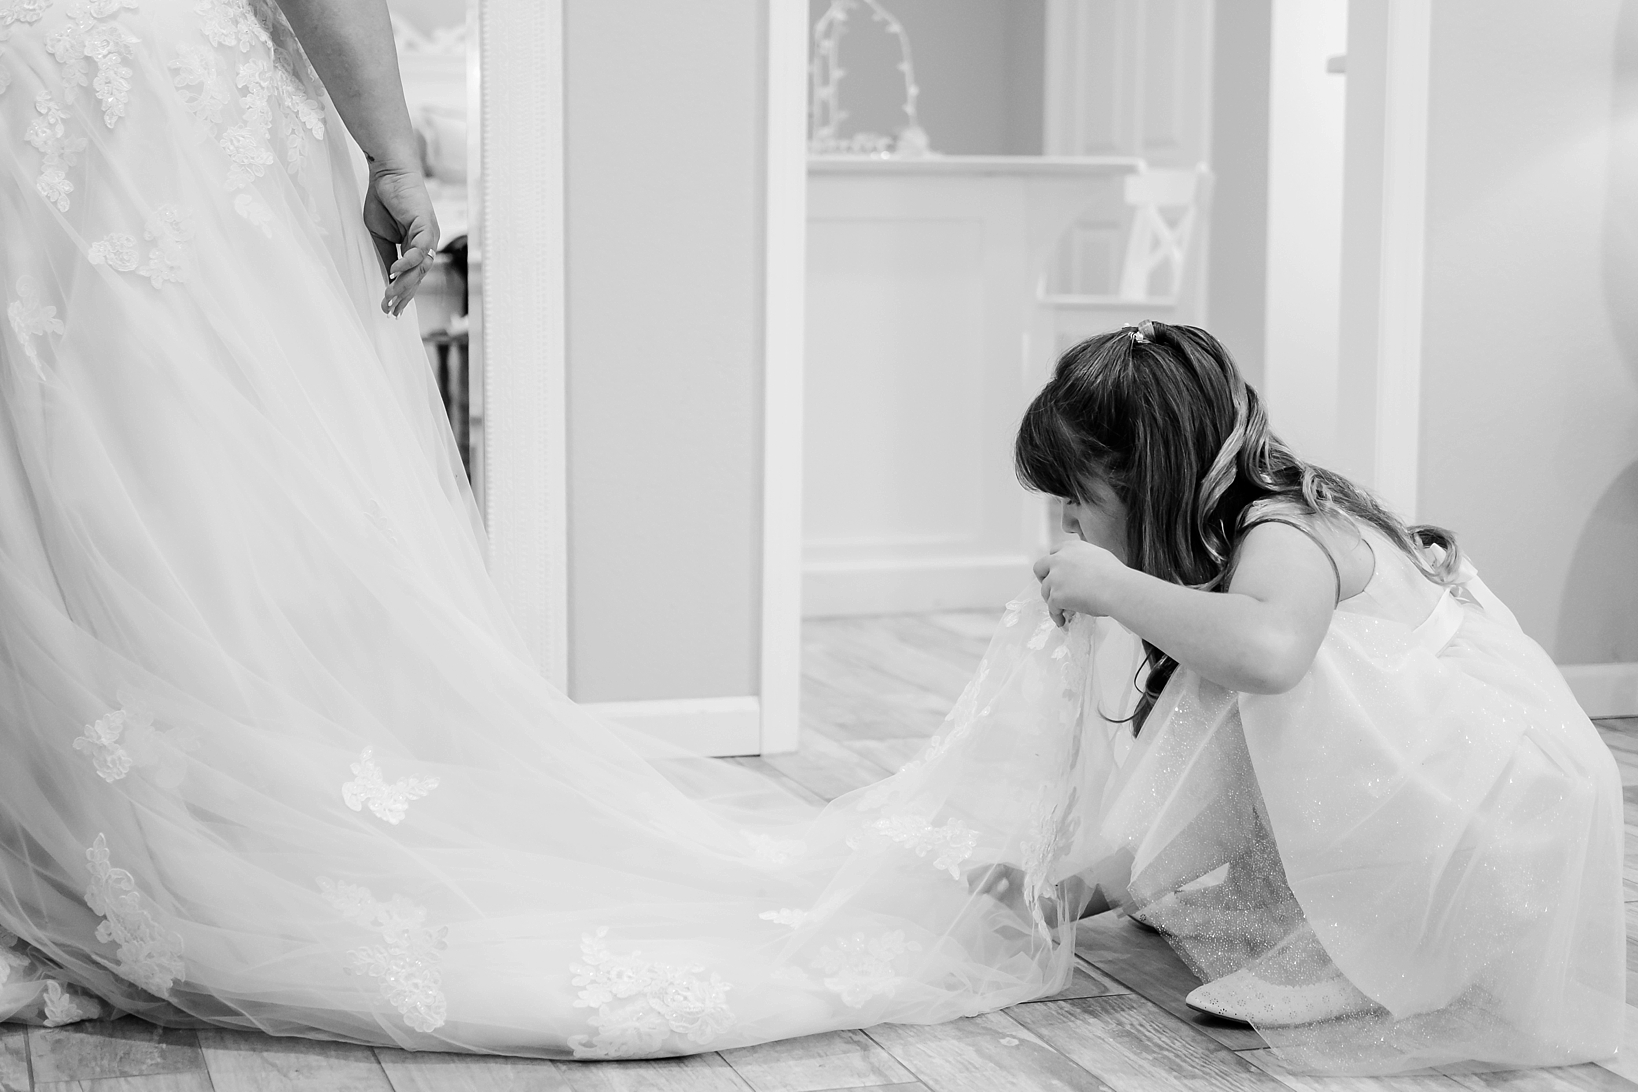 Flower girl helps adjust the cathedral veil of the Bride in classic black and white by Sarah and Ben Photography